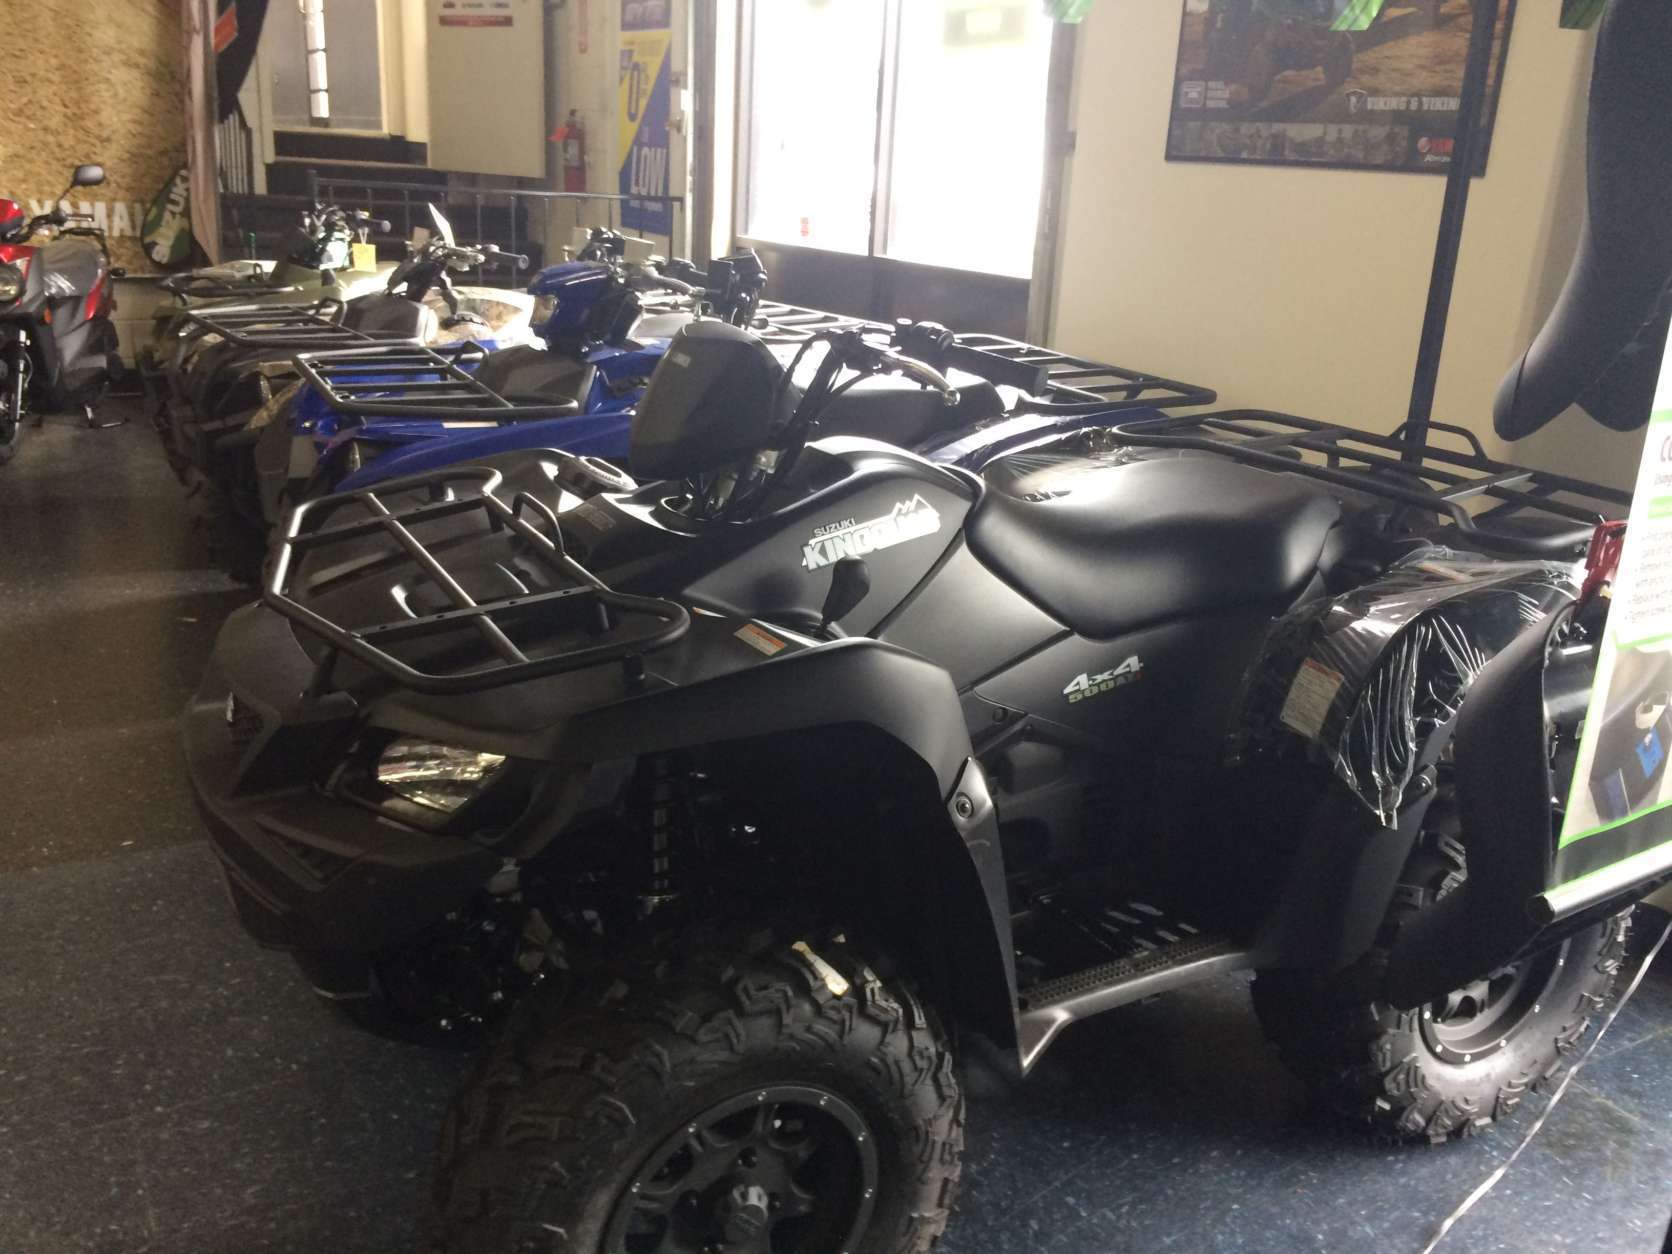 Between 150 and 175 ATVs and dirt bikes were stolen from dealers last year in Maryland, Virginia and Pennsylvania, Johnston said. "We all have sophisticated alarm and camera systems; unfortunately, determined thieves are a problem." (WTOP/Nick Iannelli)